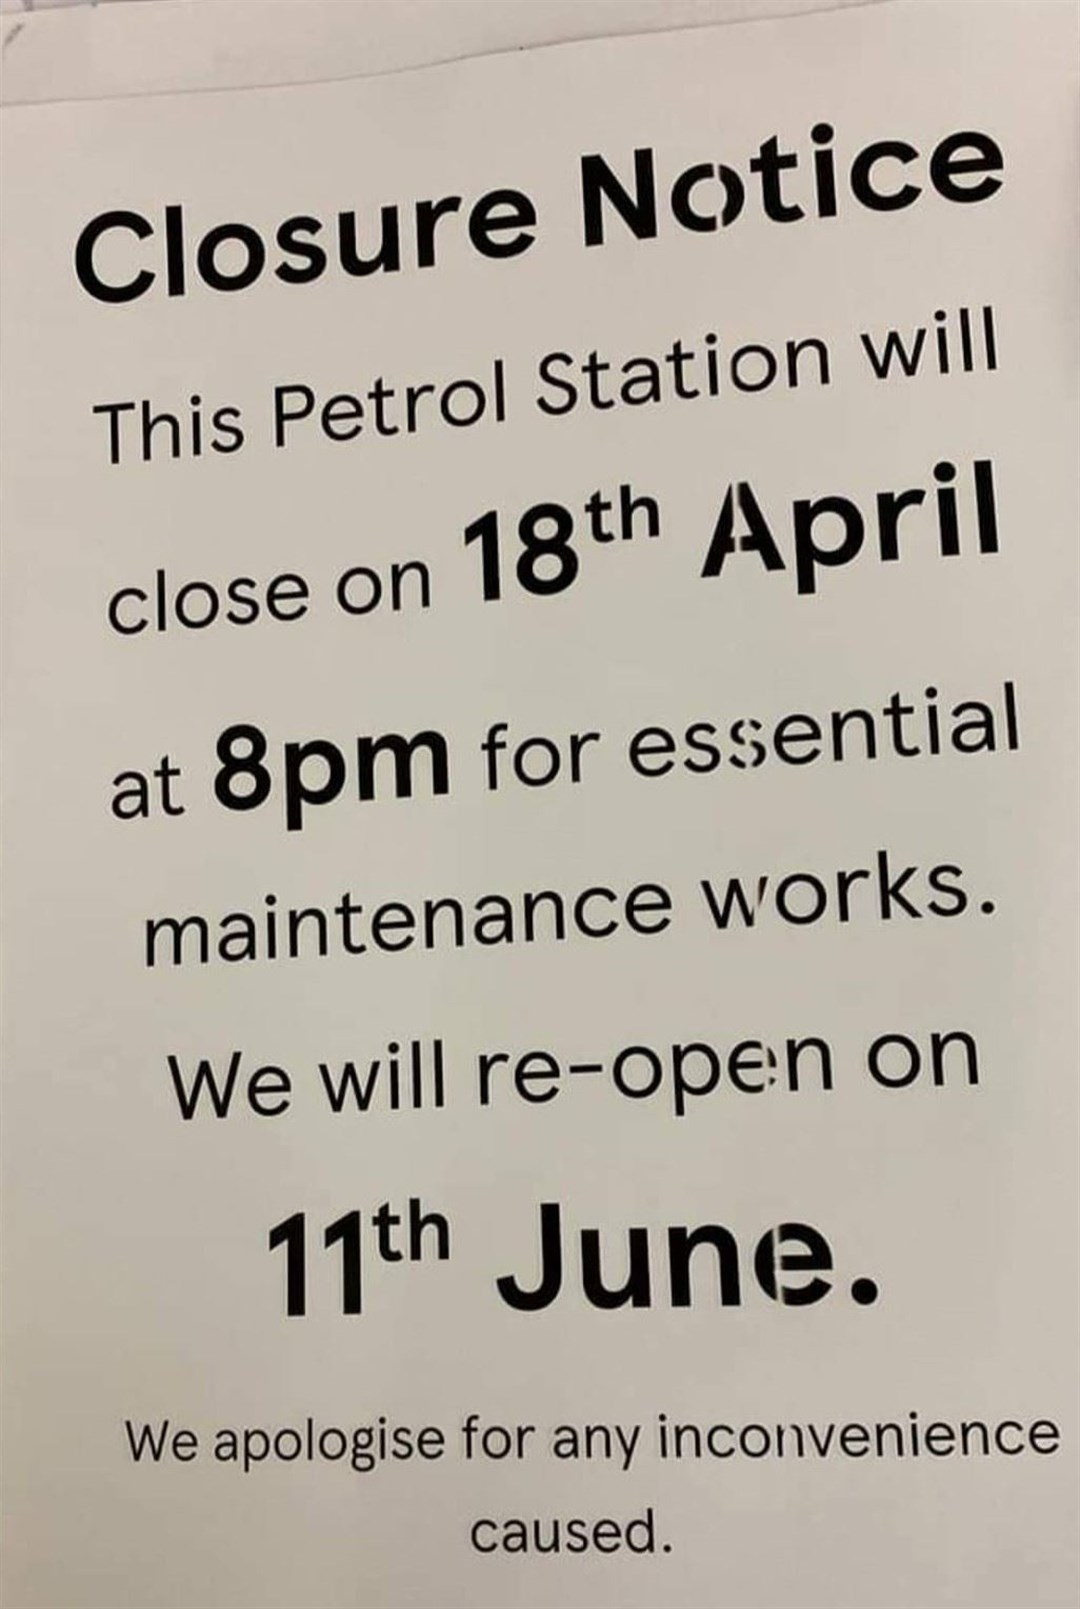 The petrol station at Tesco Dingwall announced they will be shut for essential works.